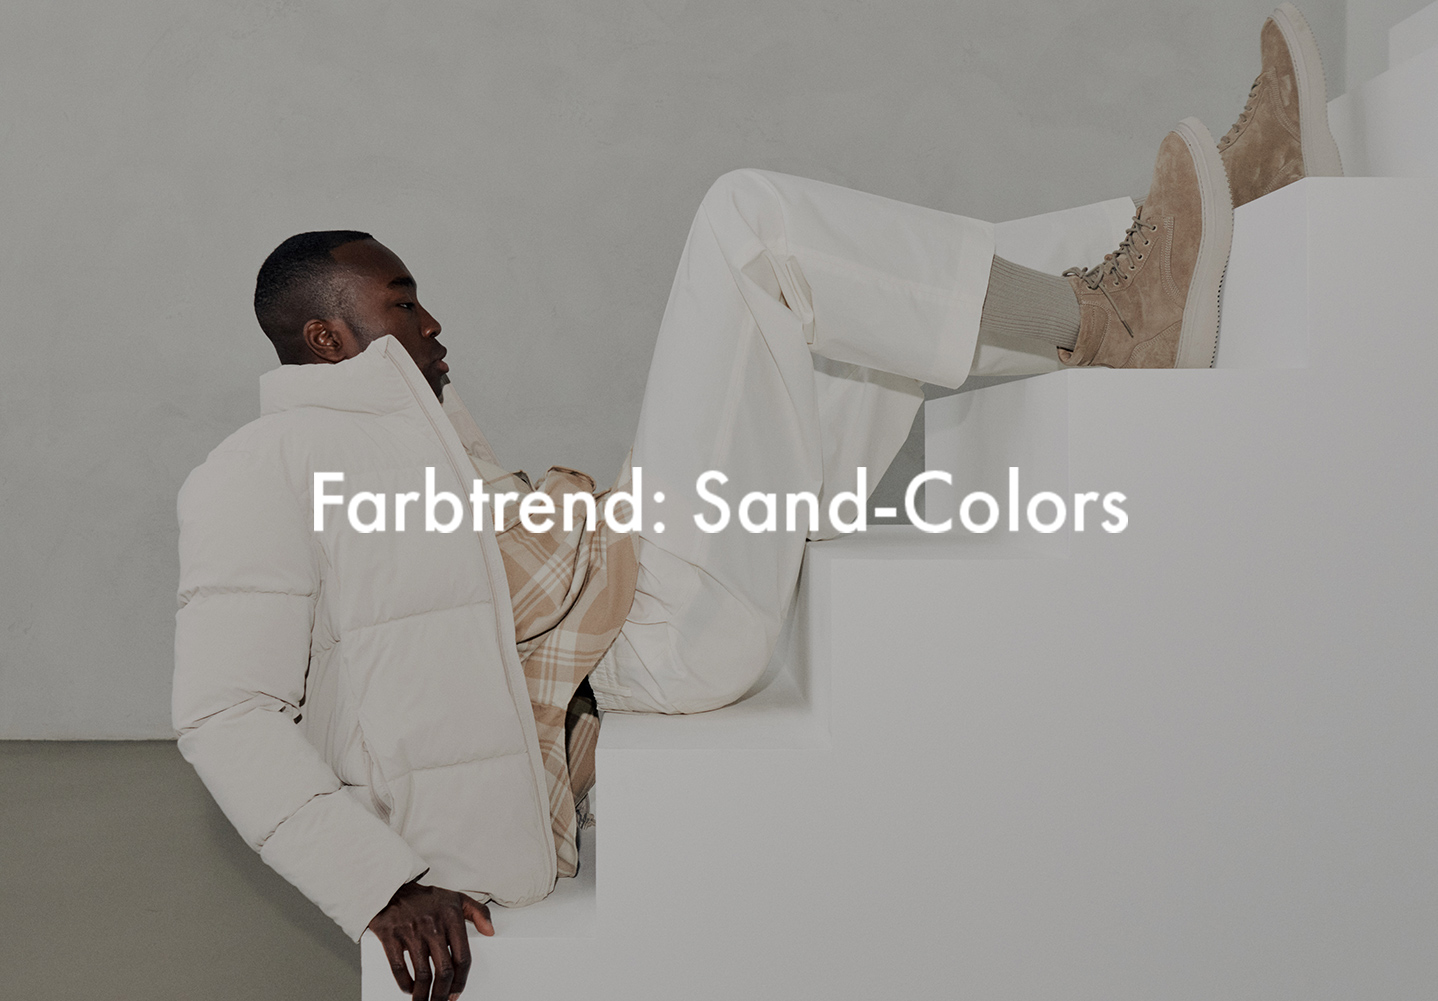 Farbtrend: Sand-Colors